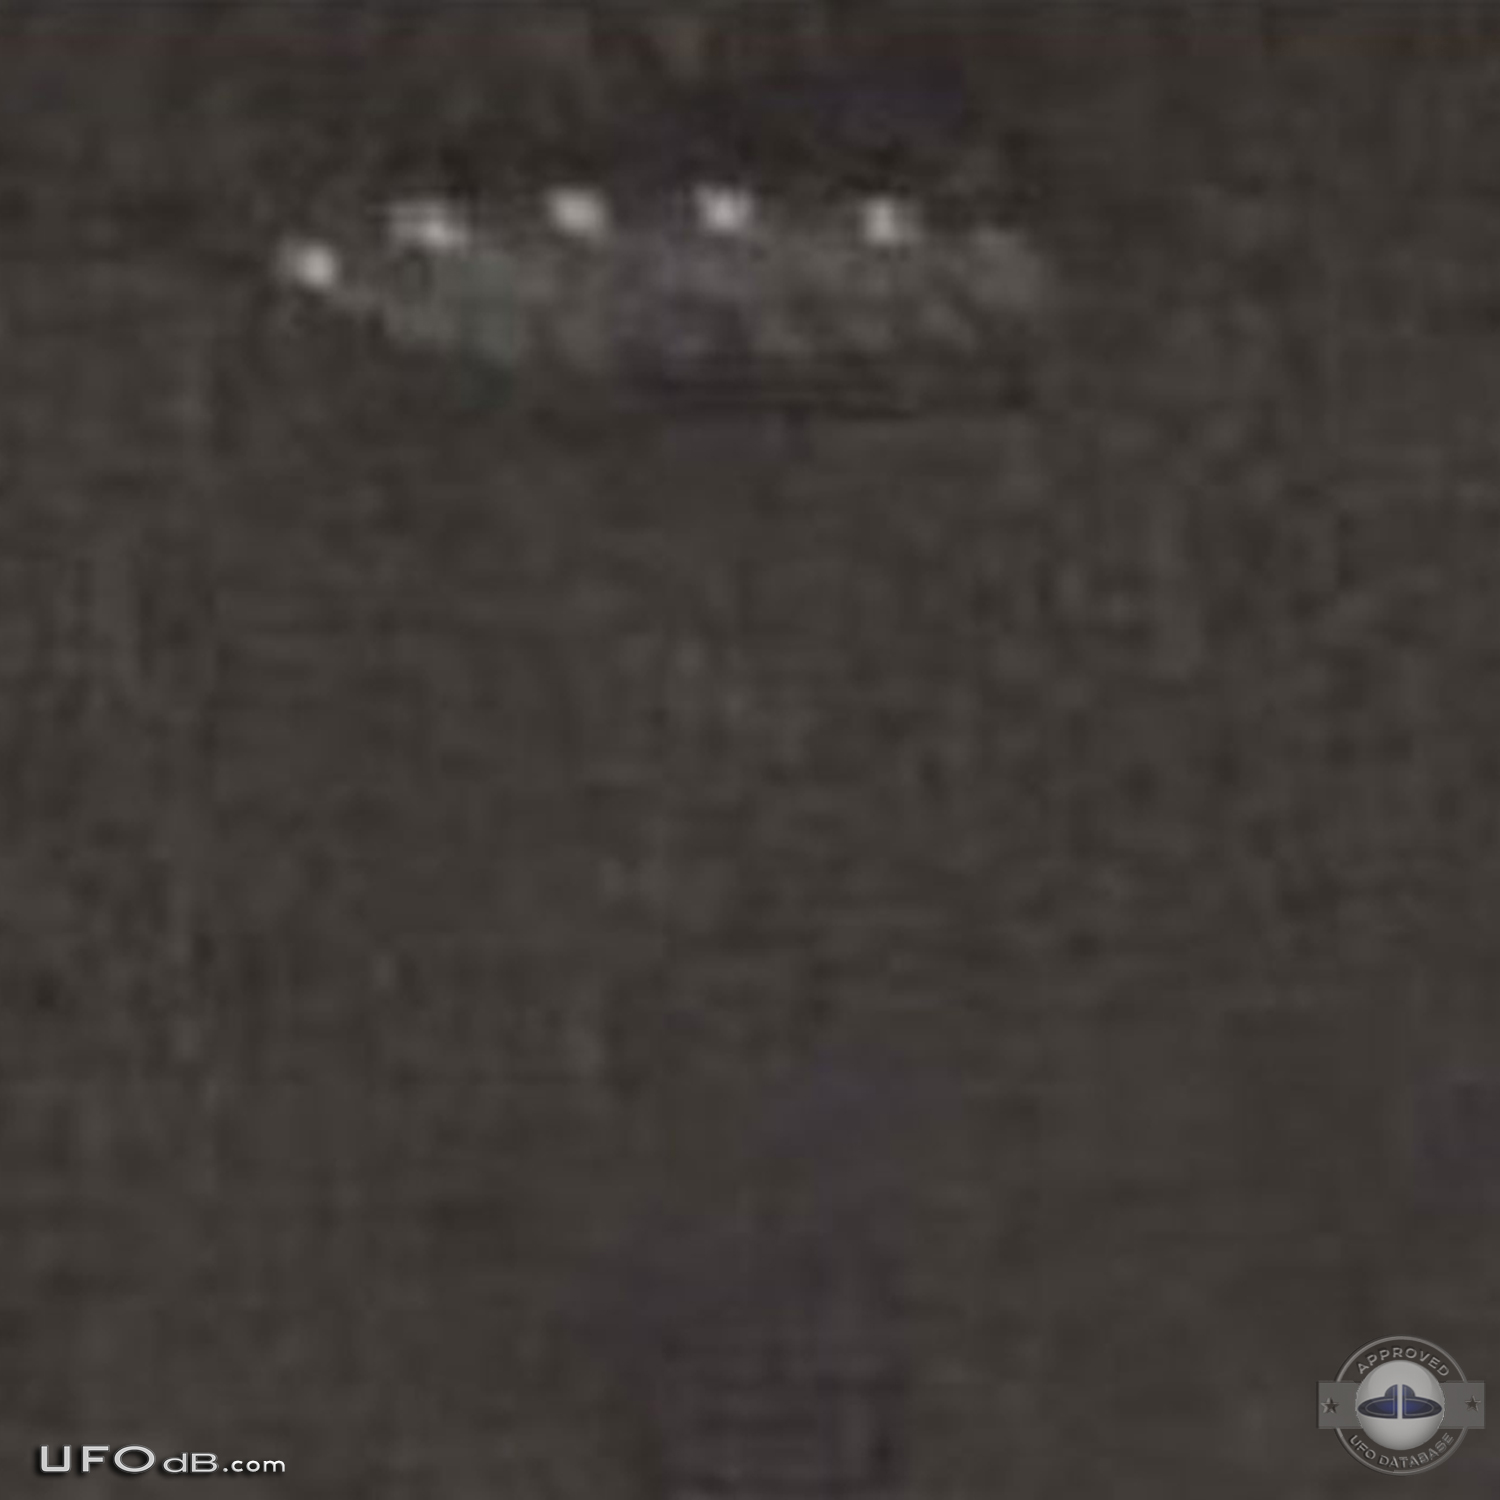 2003 UFO sighting from Dubai caught on picture by a programmer UFO Picture #462-3